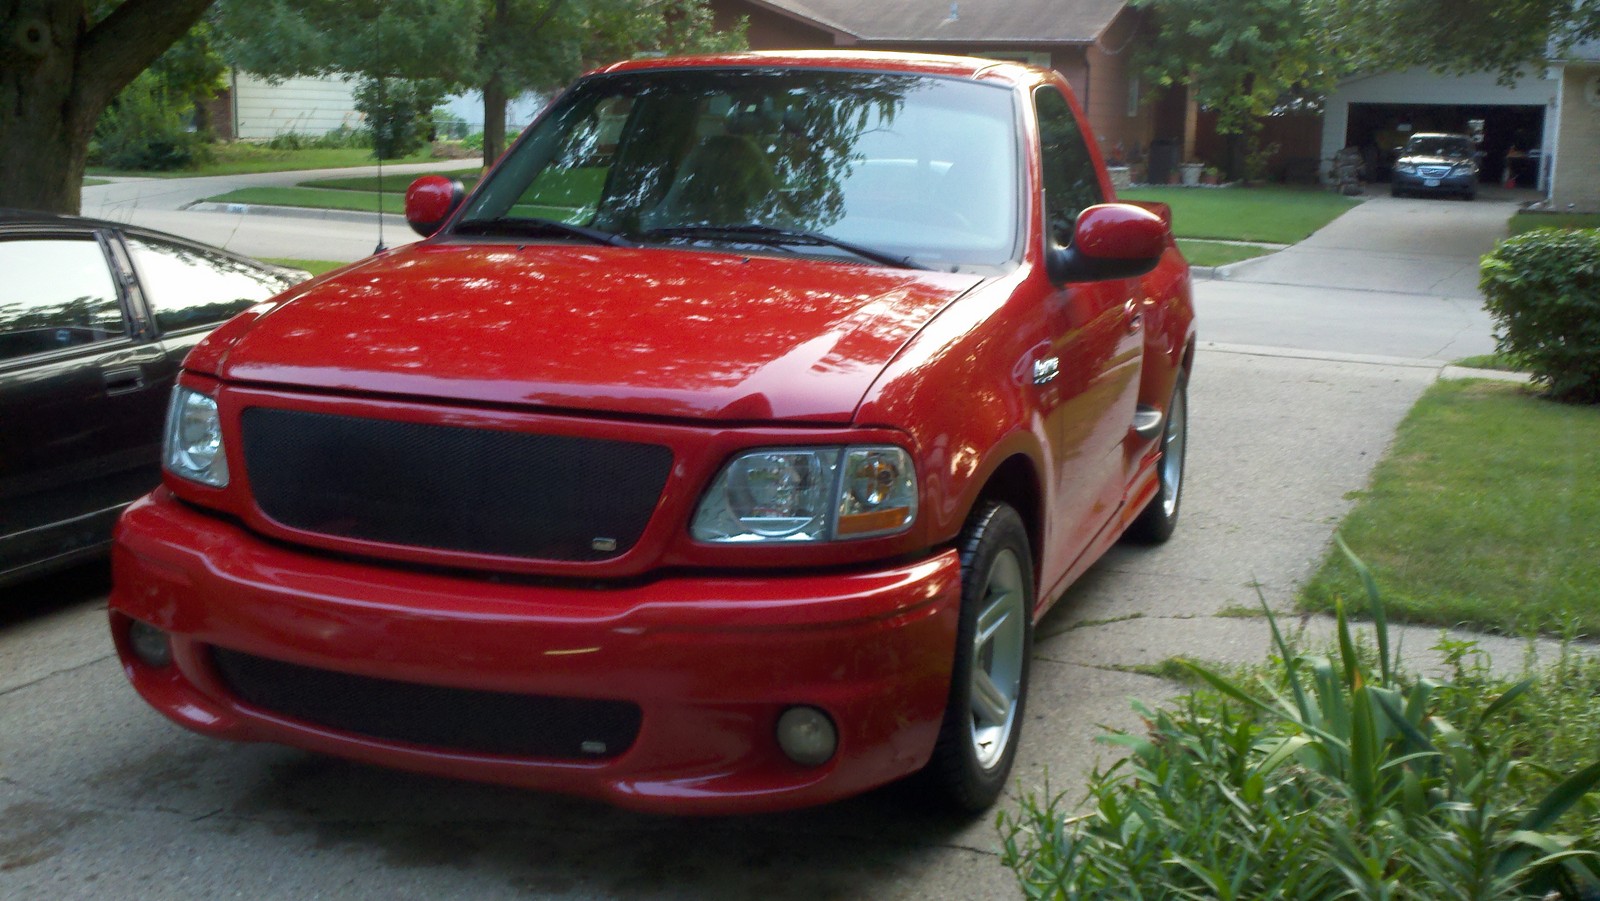 2003 Ford lightning stock 1/4 mile times #2